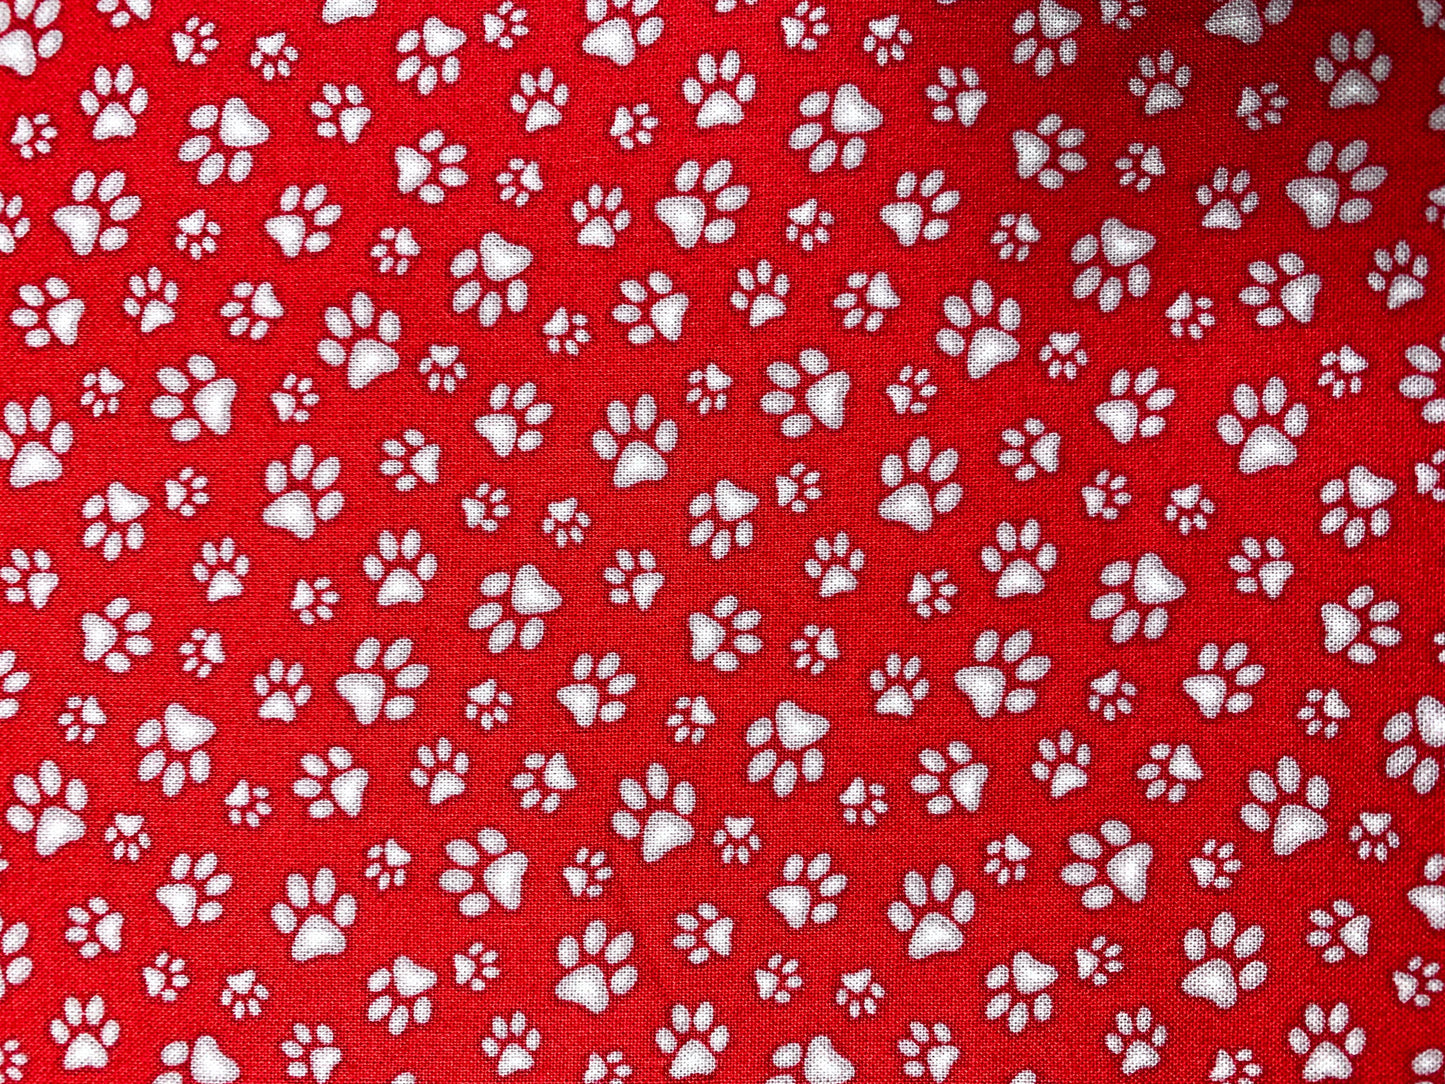 Red Paw fabric 181 Adorable Pet Paws